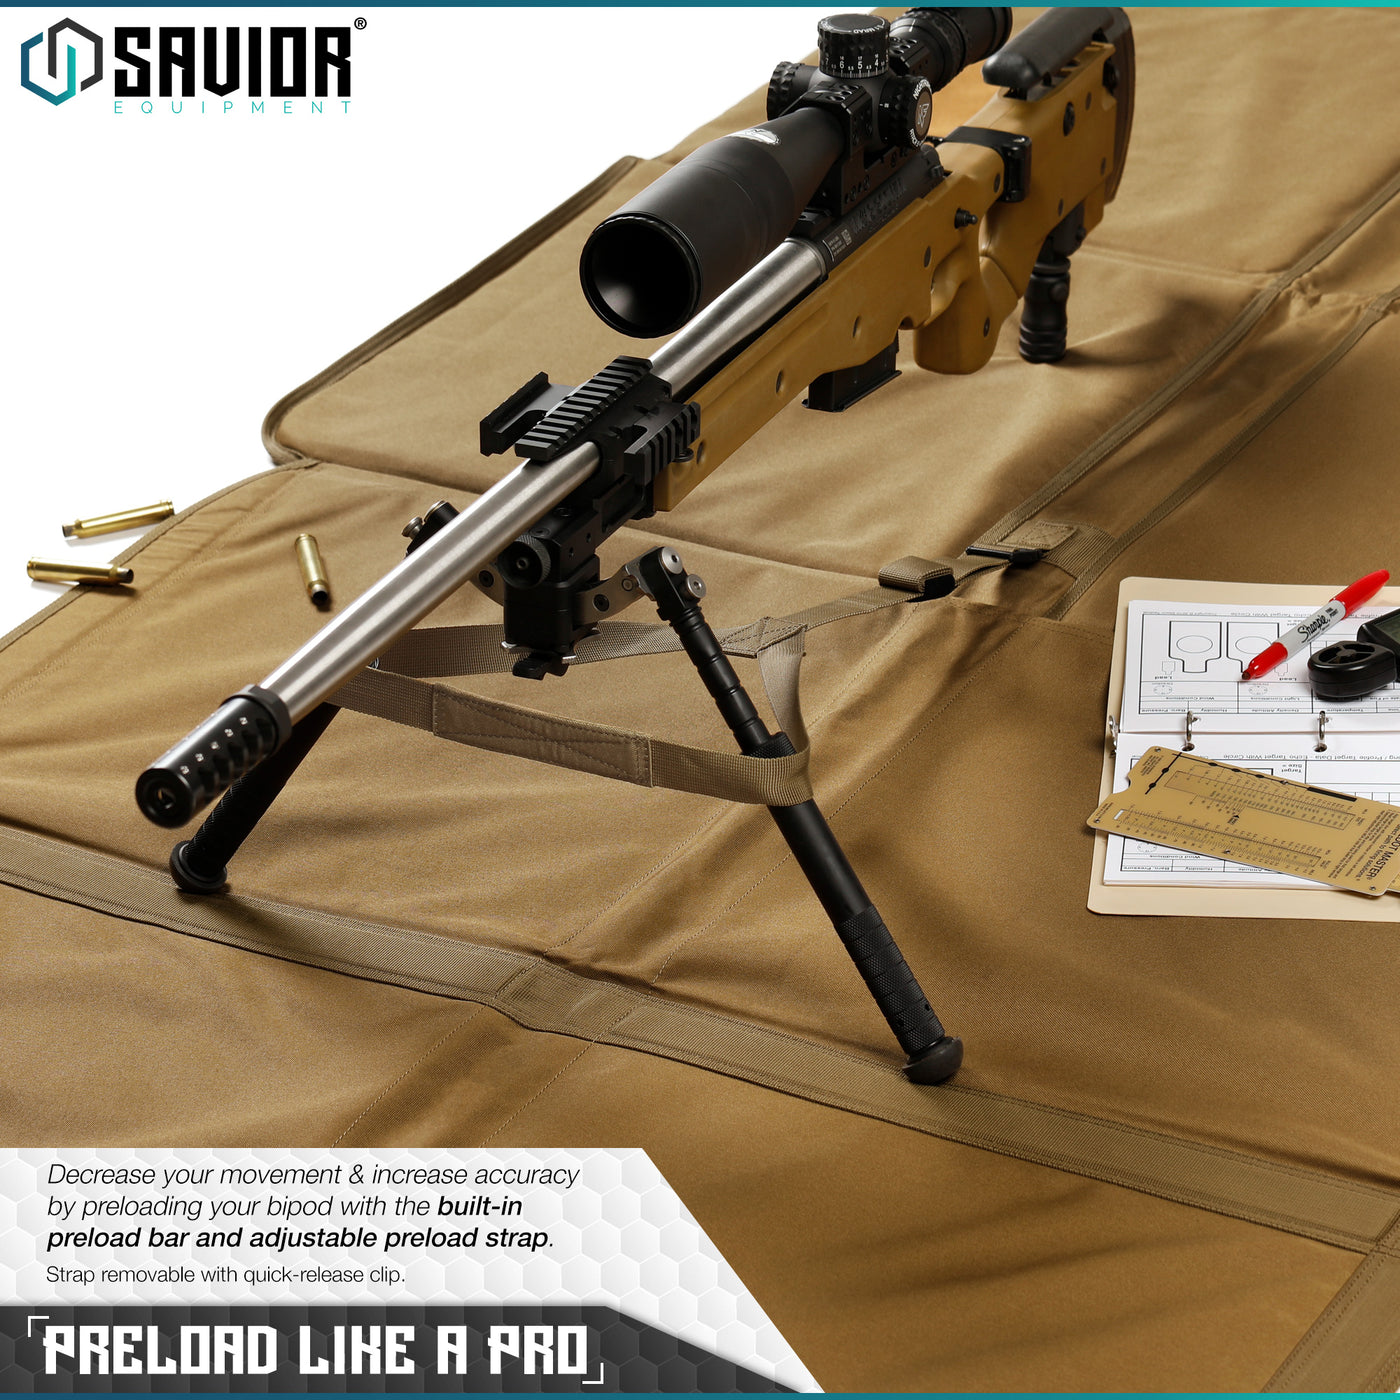 Preload Like a Pro - Decrease your movement & increase accuracy by preloading your bipod with the built-in preload bar and adjustable preload strap. Strap is removable with quick-release clip.